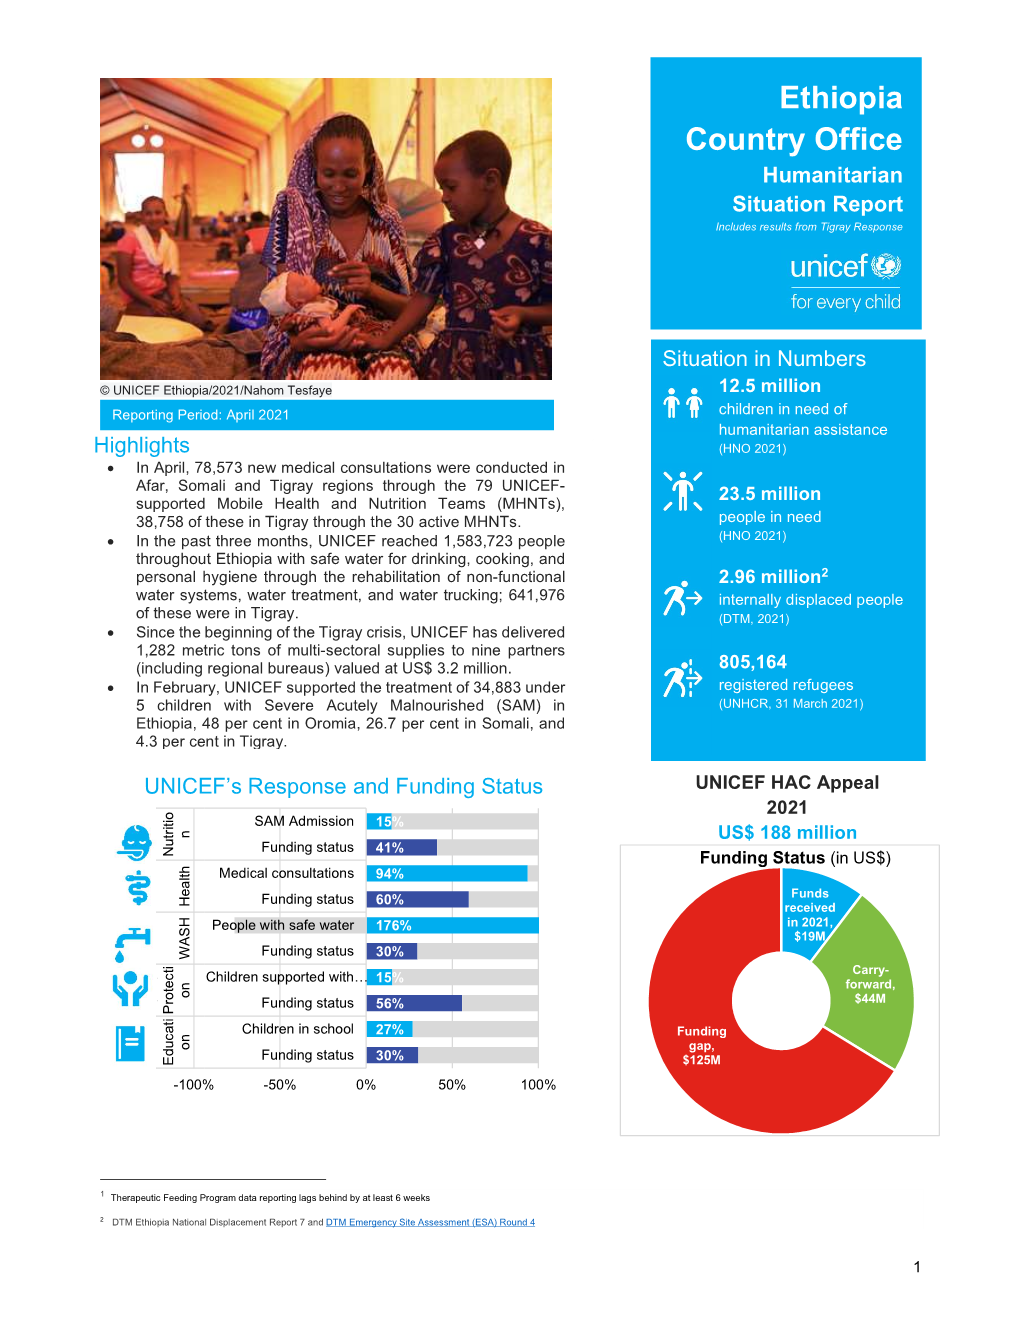 Ethiopia Country Office Humanitarian Situation Report Includes Results from Tigray Response